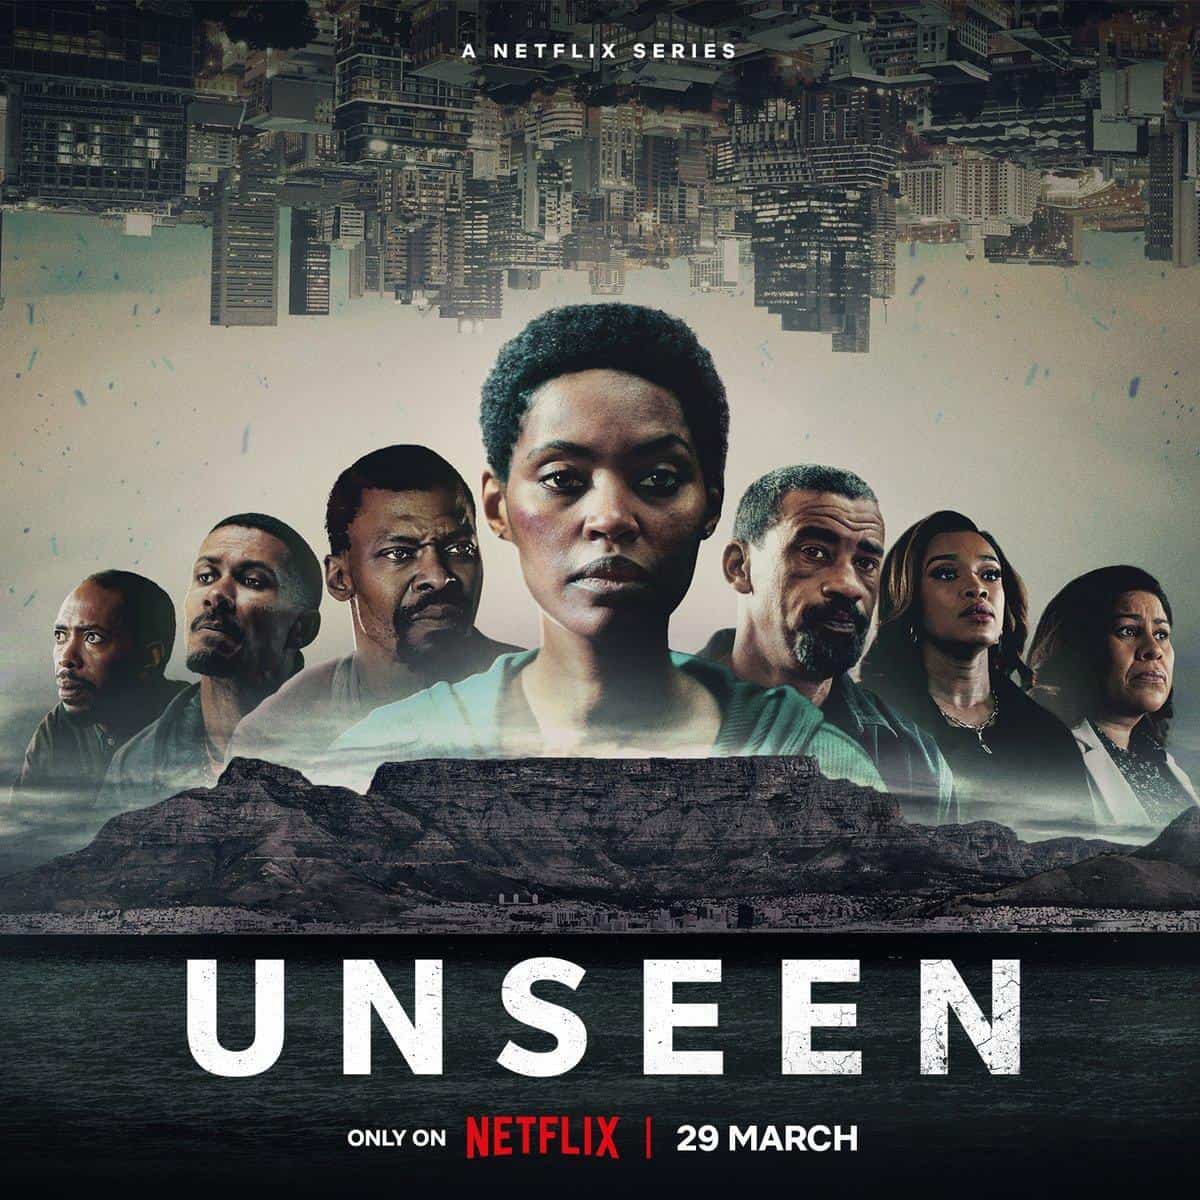 Poster for the show, Unseen